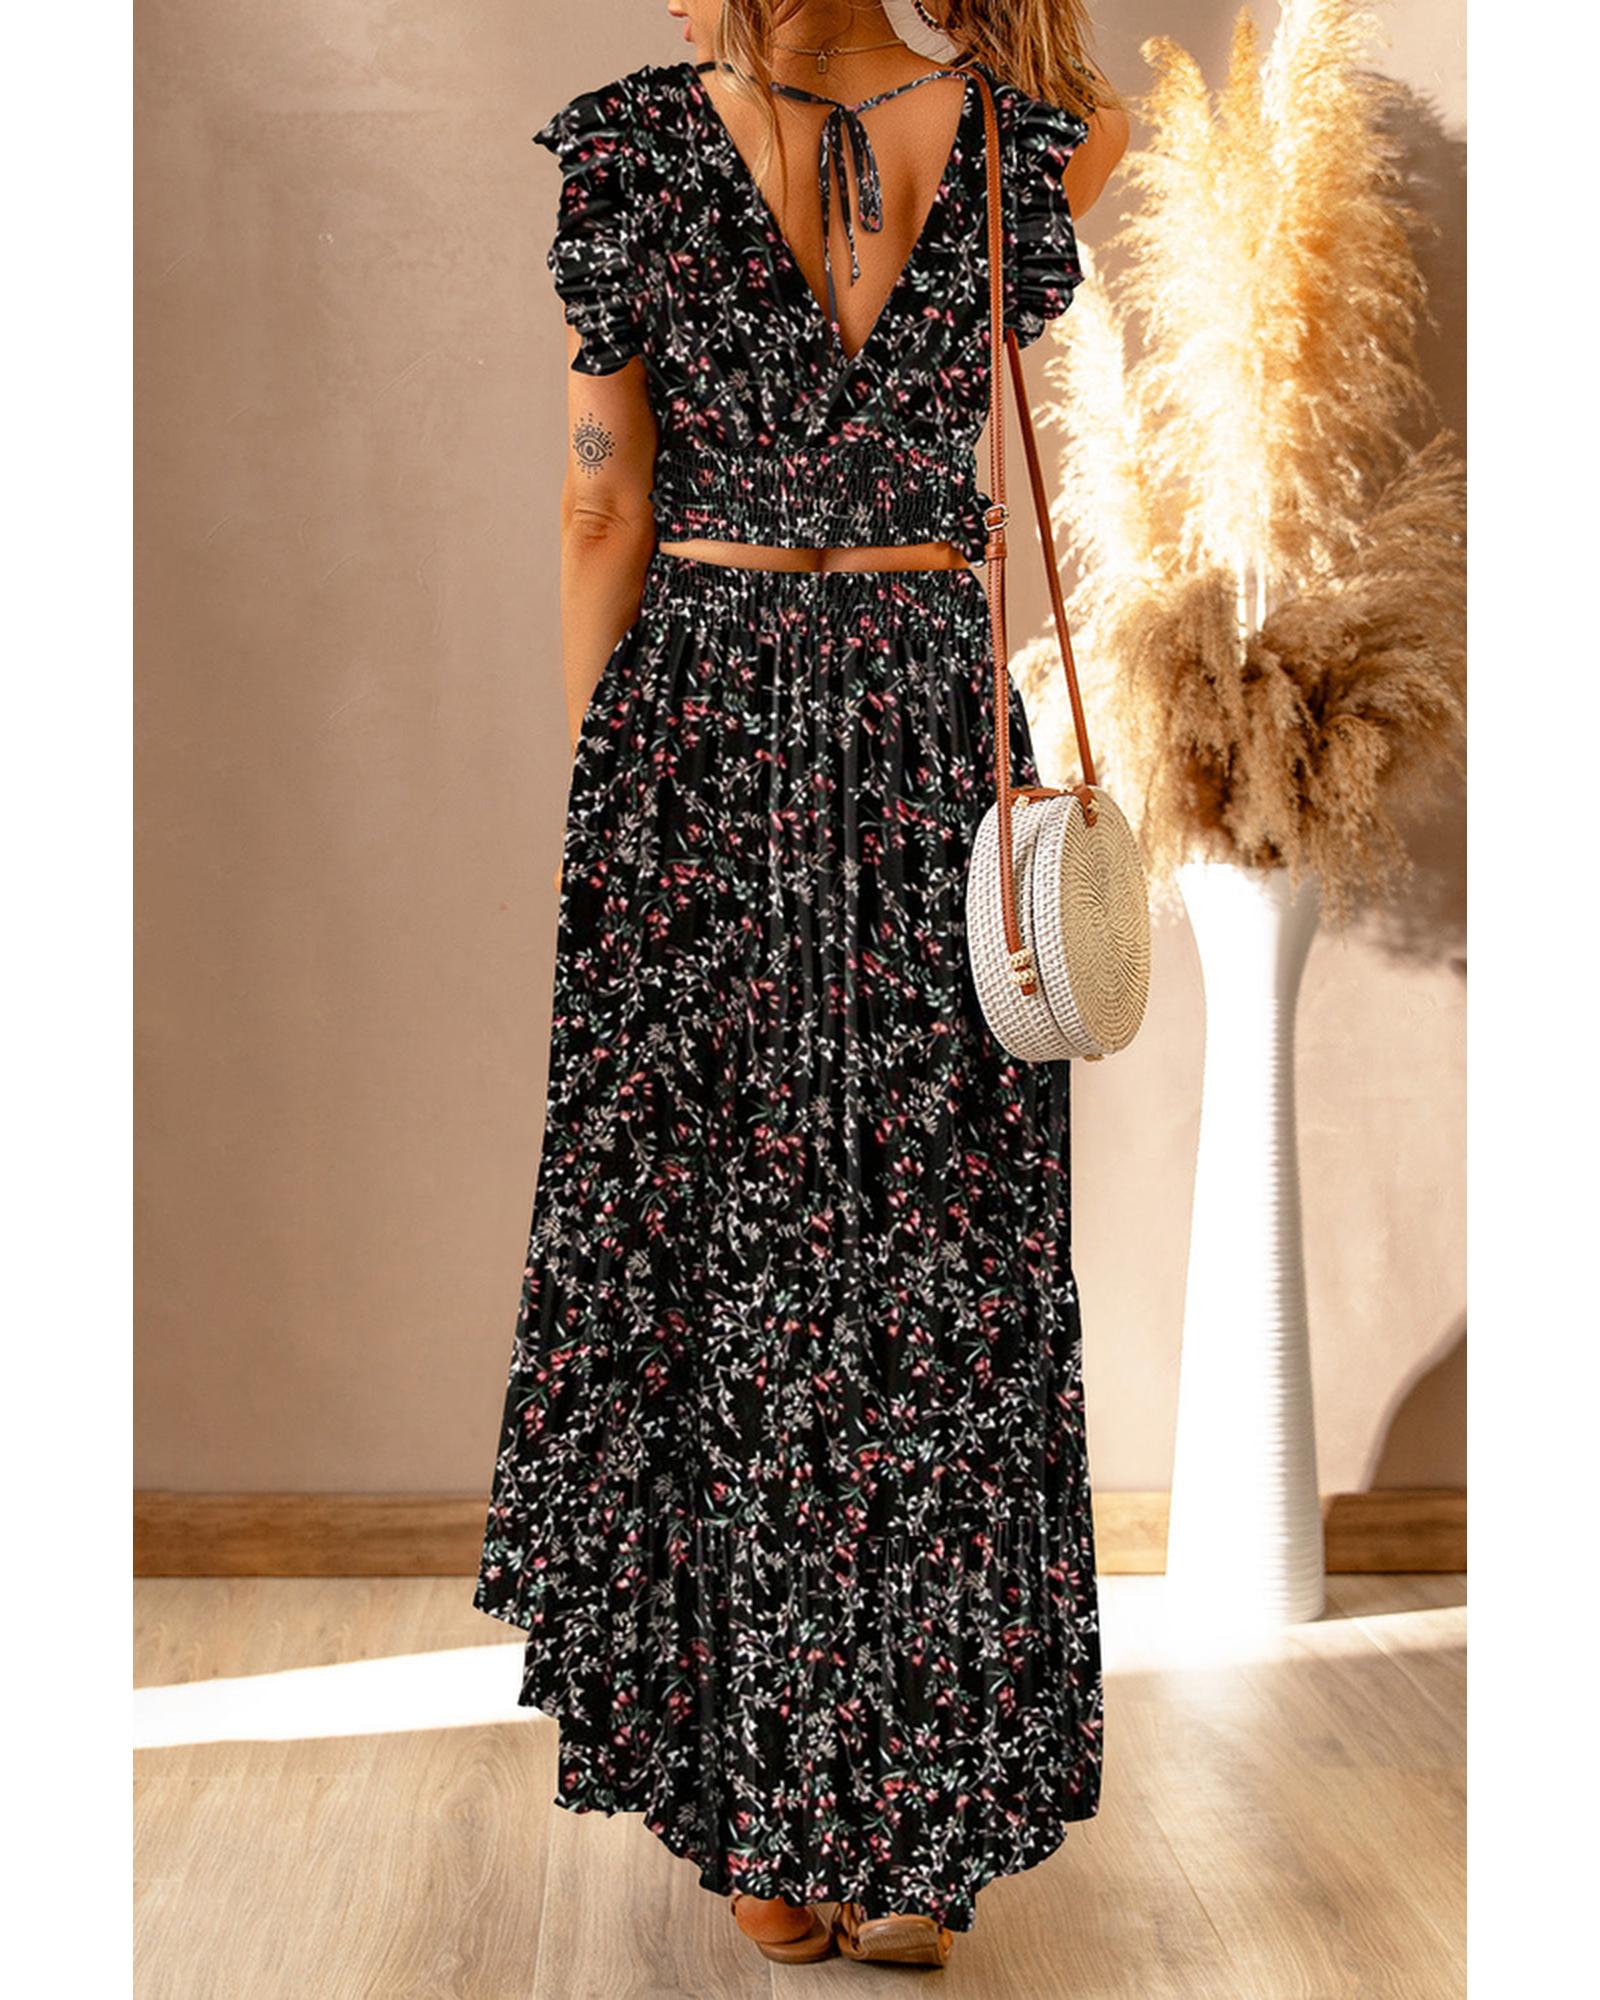 Floral Ruffled Crop Top and Maxi Skirt Set - L